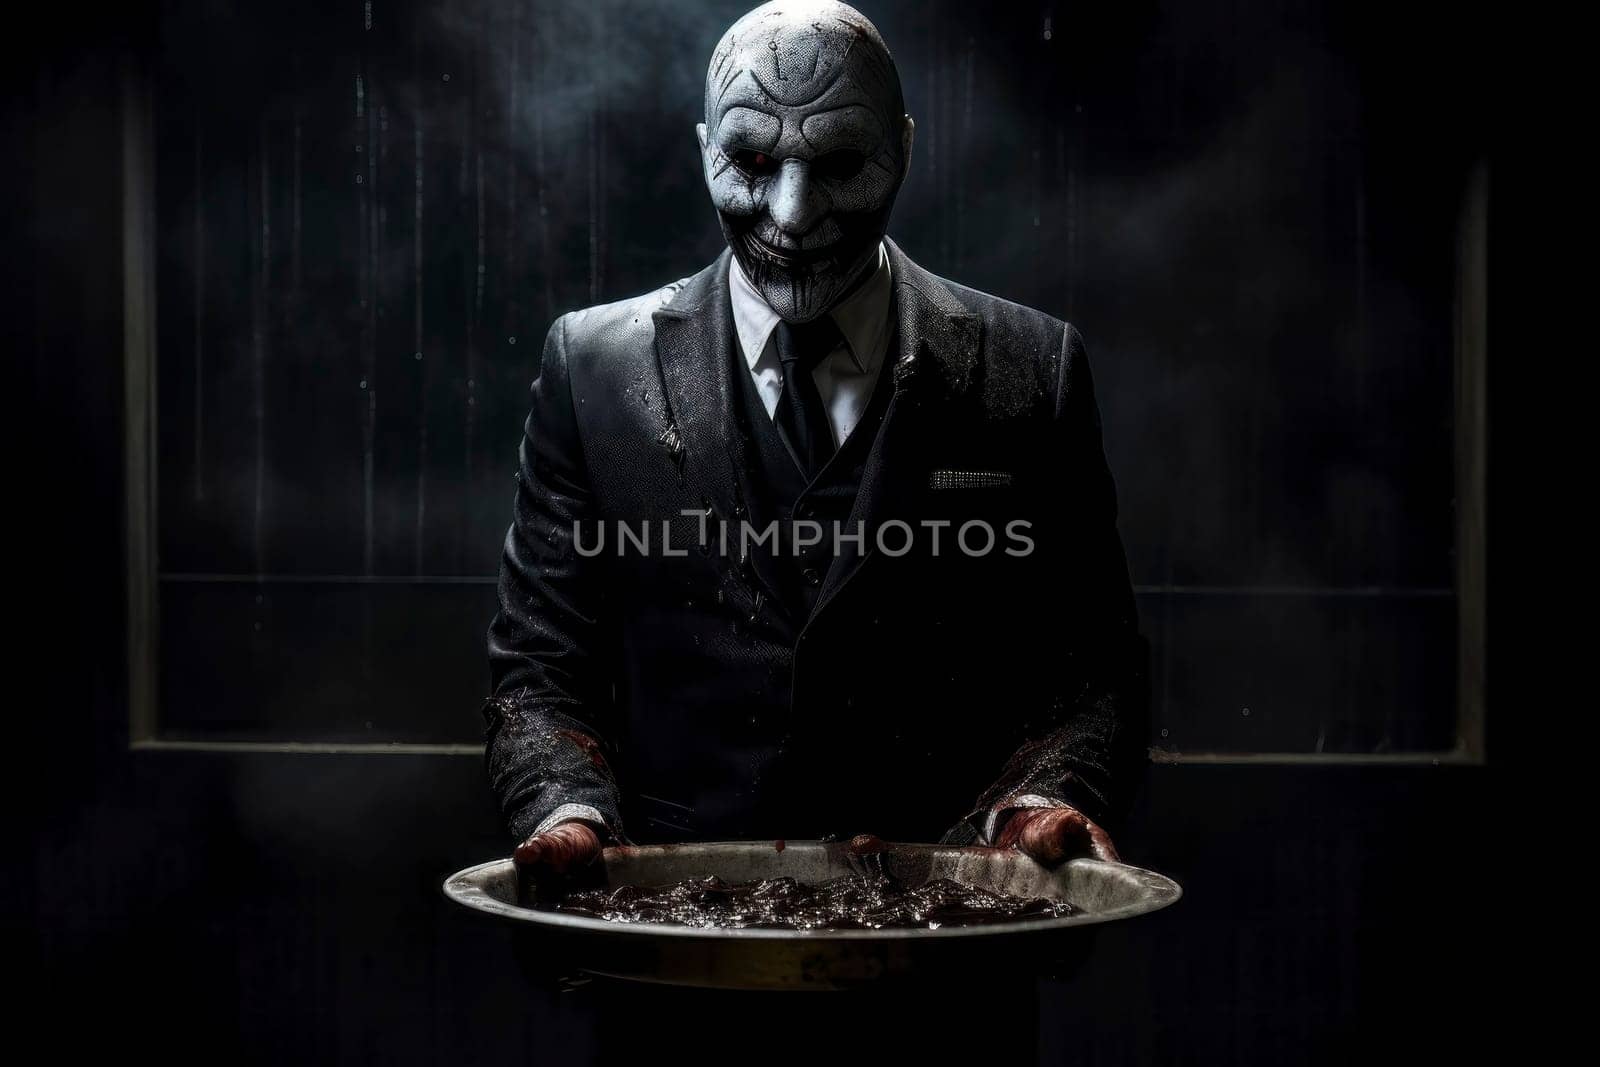 A chilling image portraying a demonic figure holding a platter brimming with blood, evoking a sense of horror and darkness.